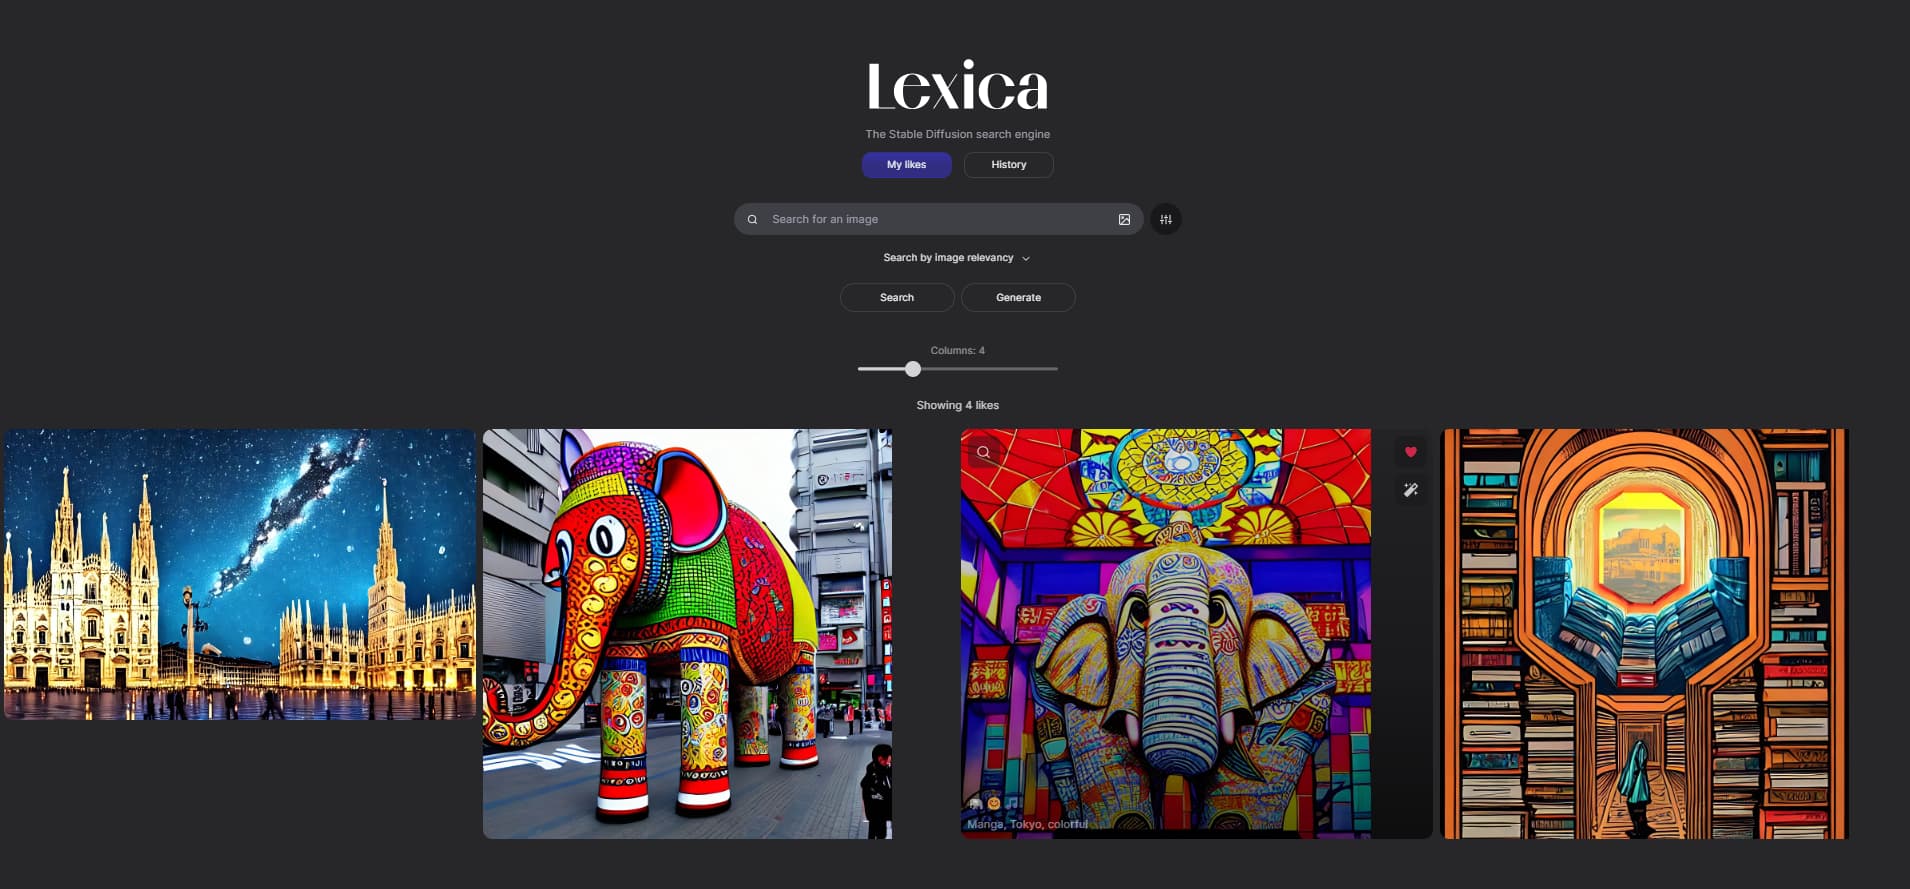 Lexica Art: How To Search And Create Images With Artificial Intelligence -  Strani Anelli